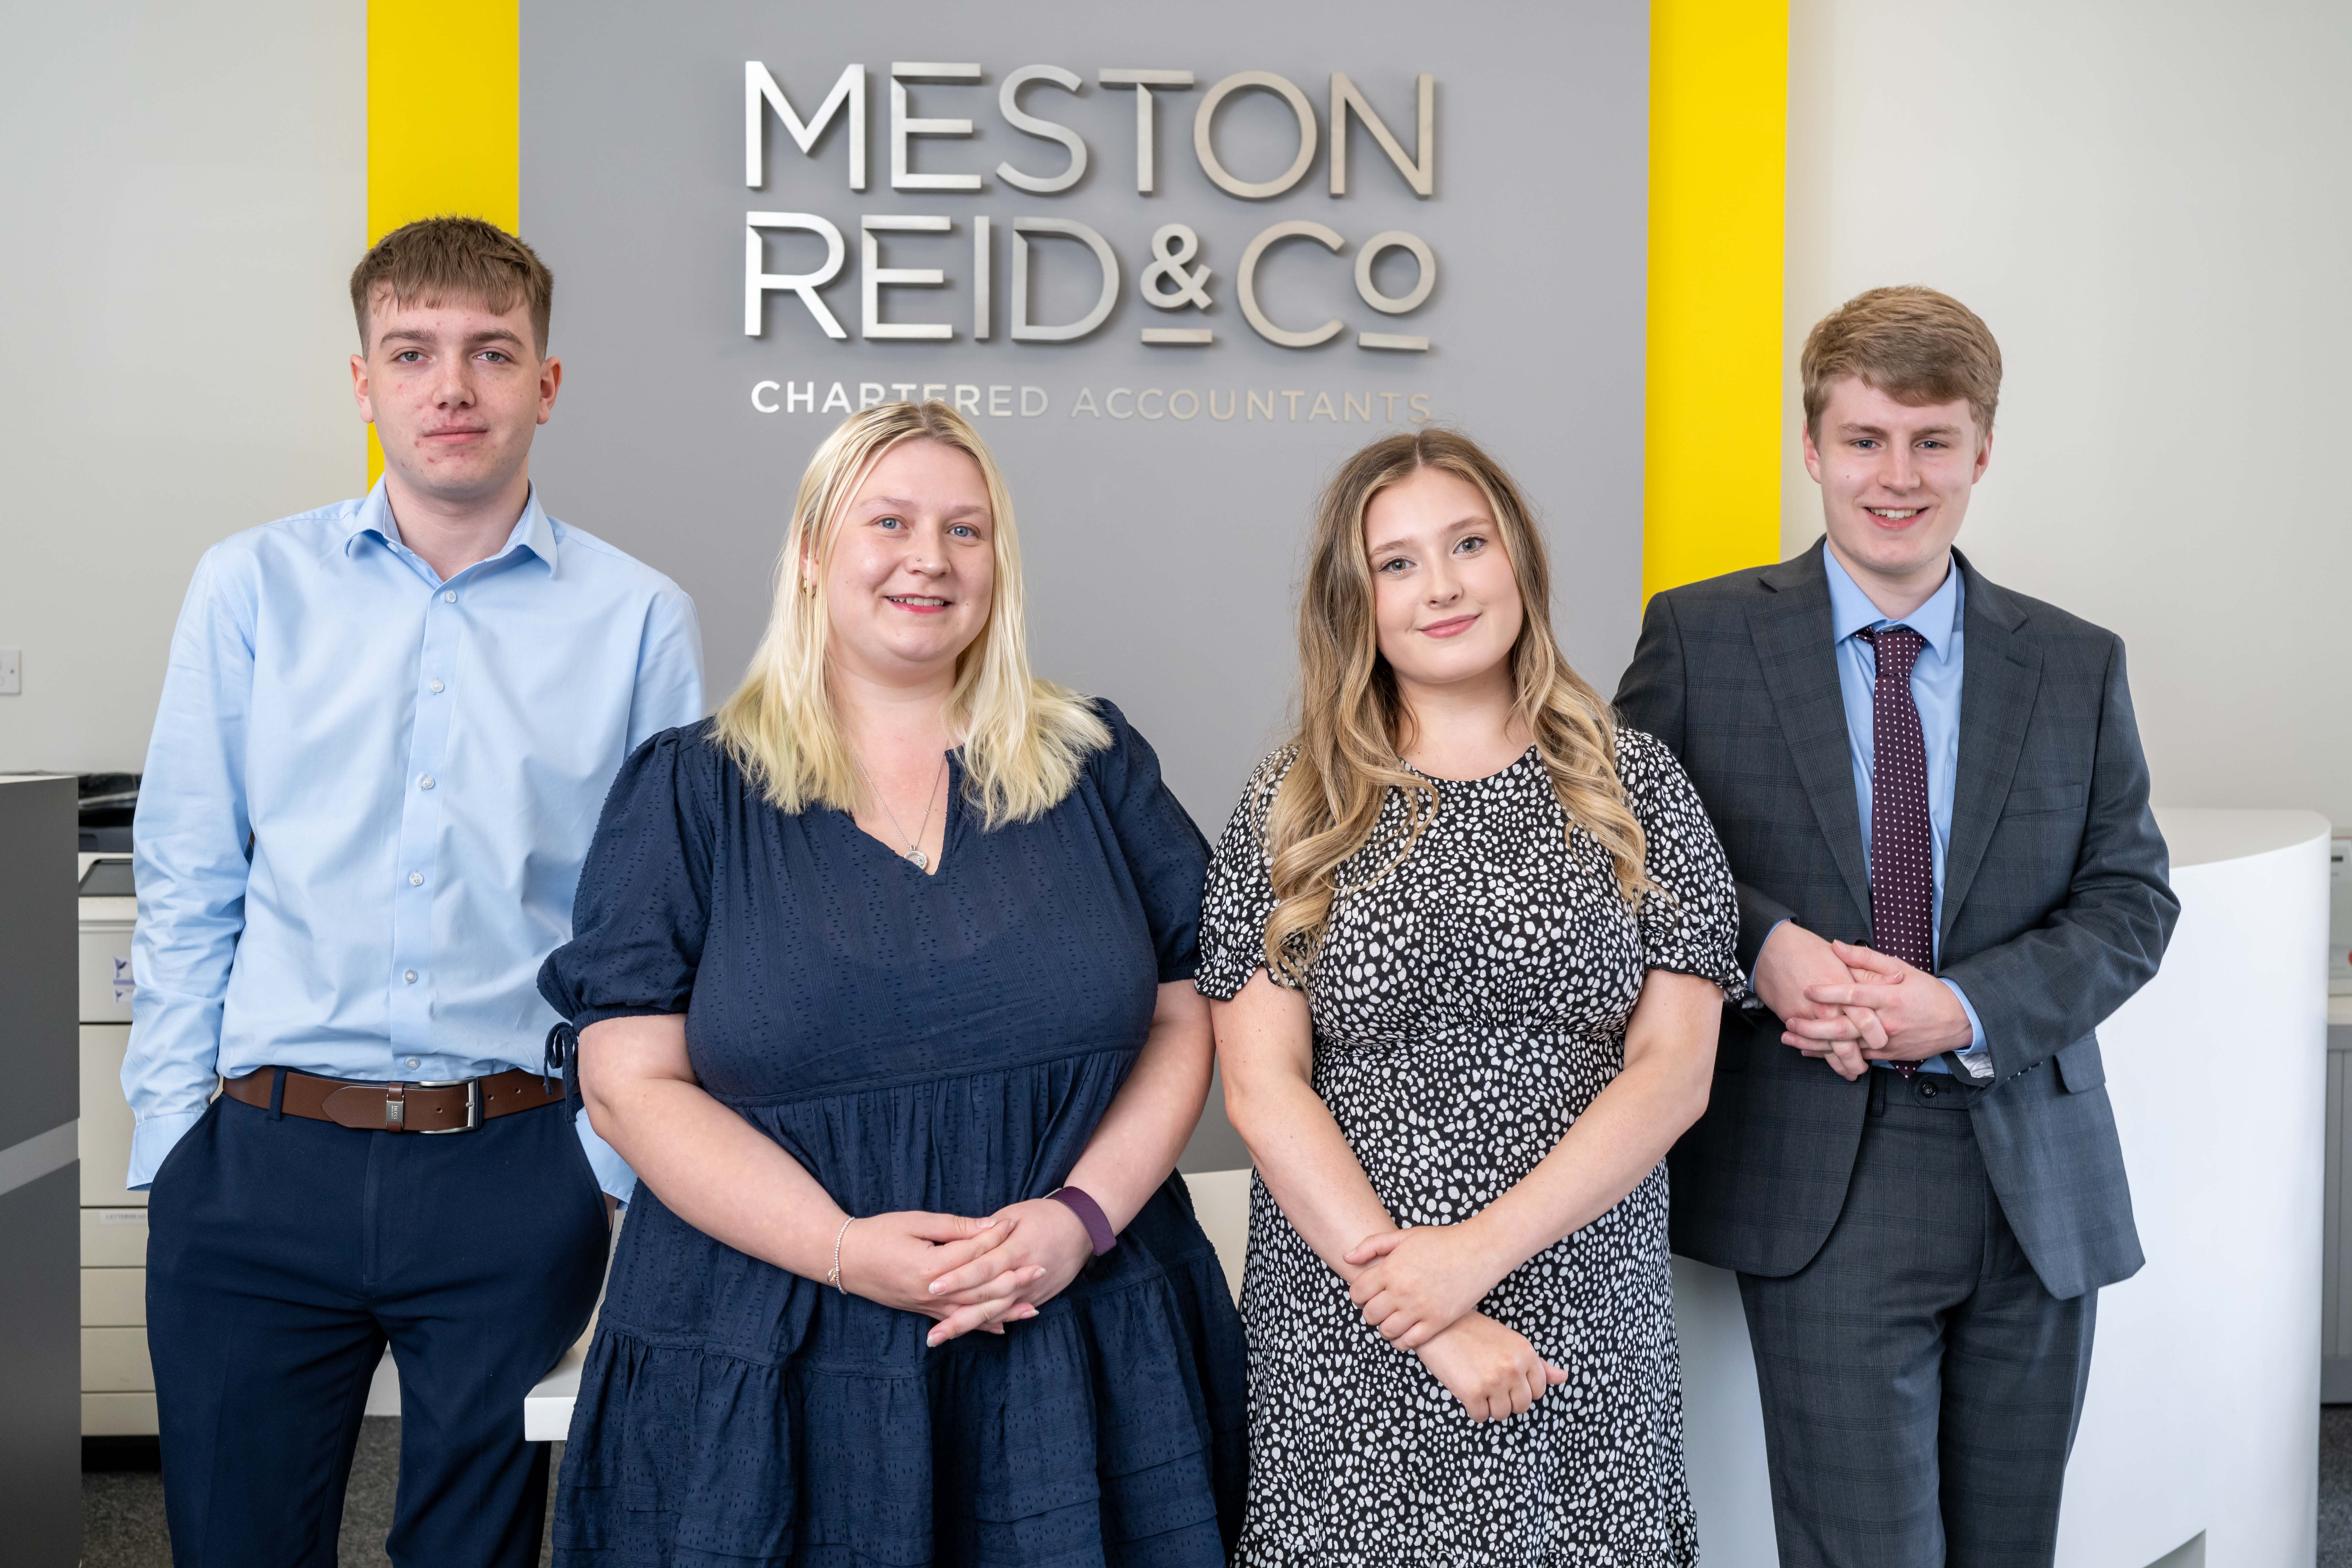 Meston Reid & Co cultivates next generation of accountants with four appointments